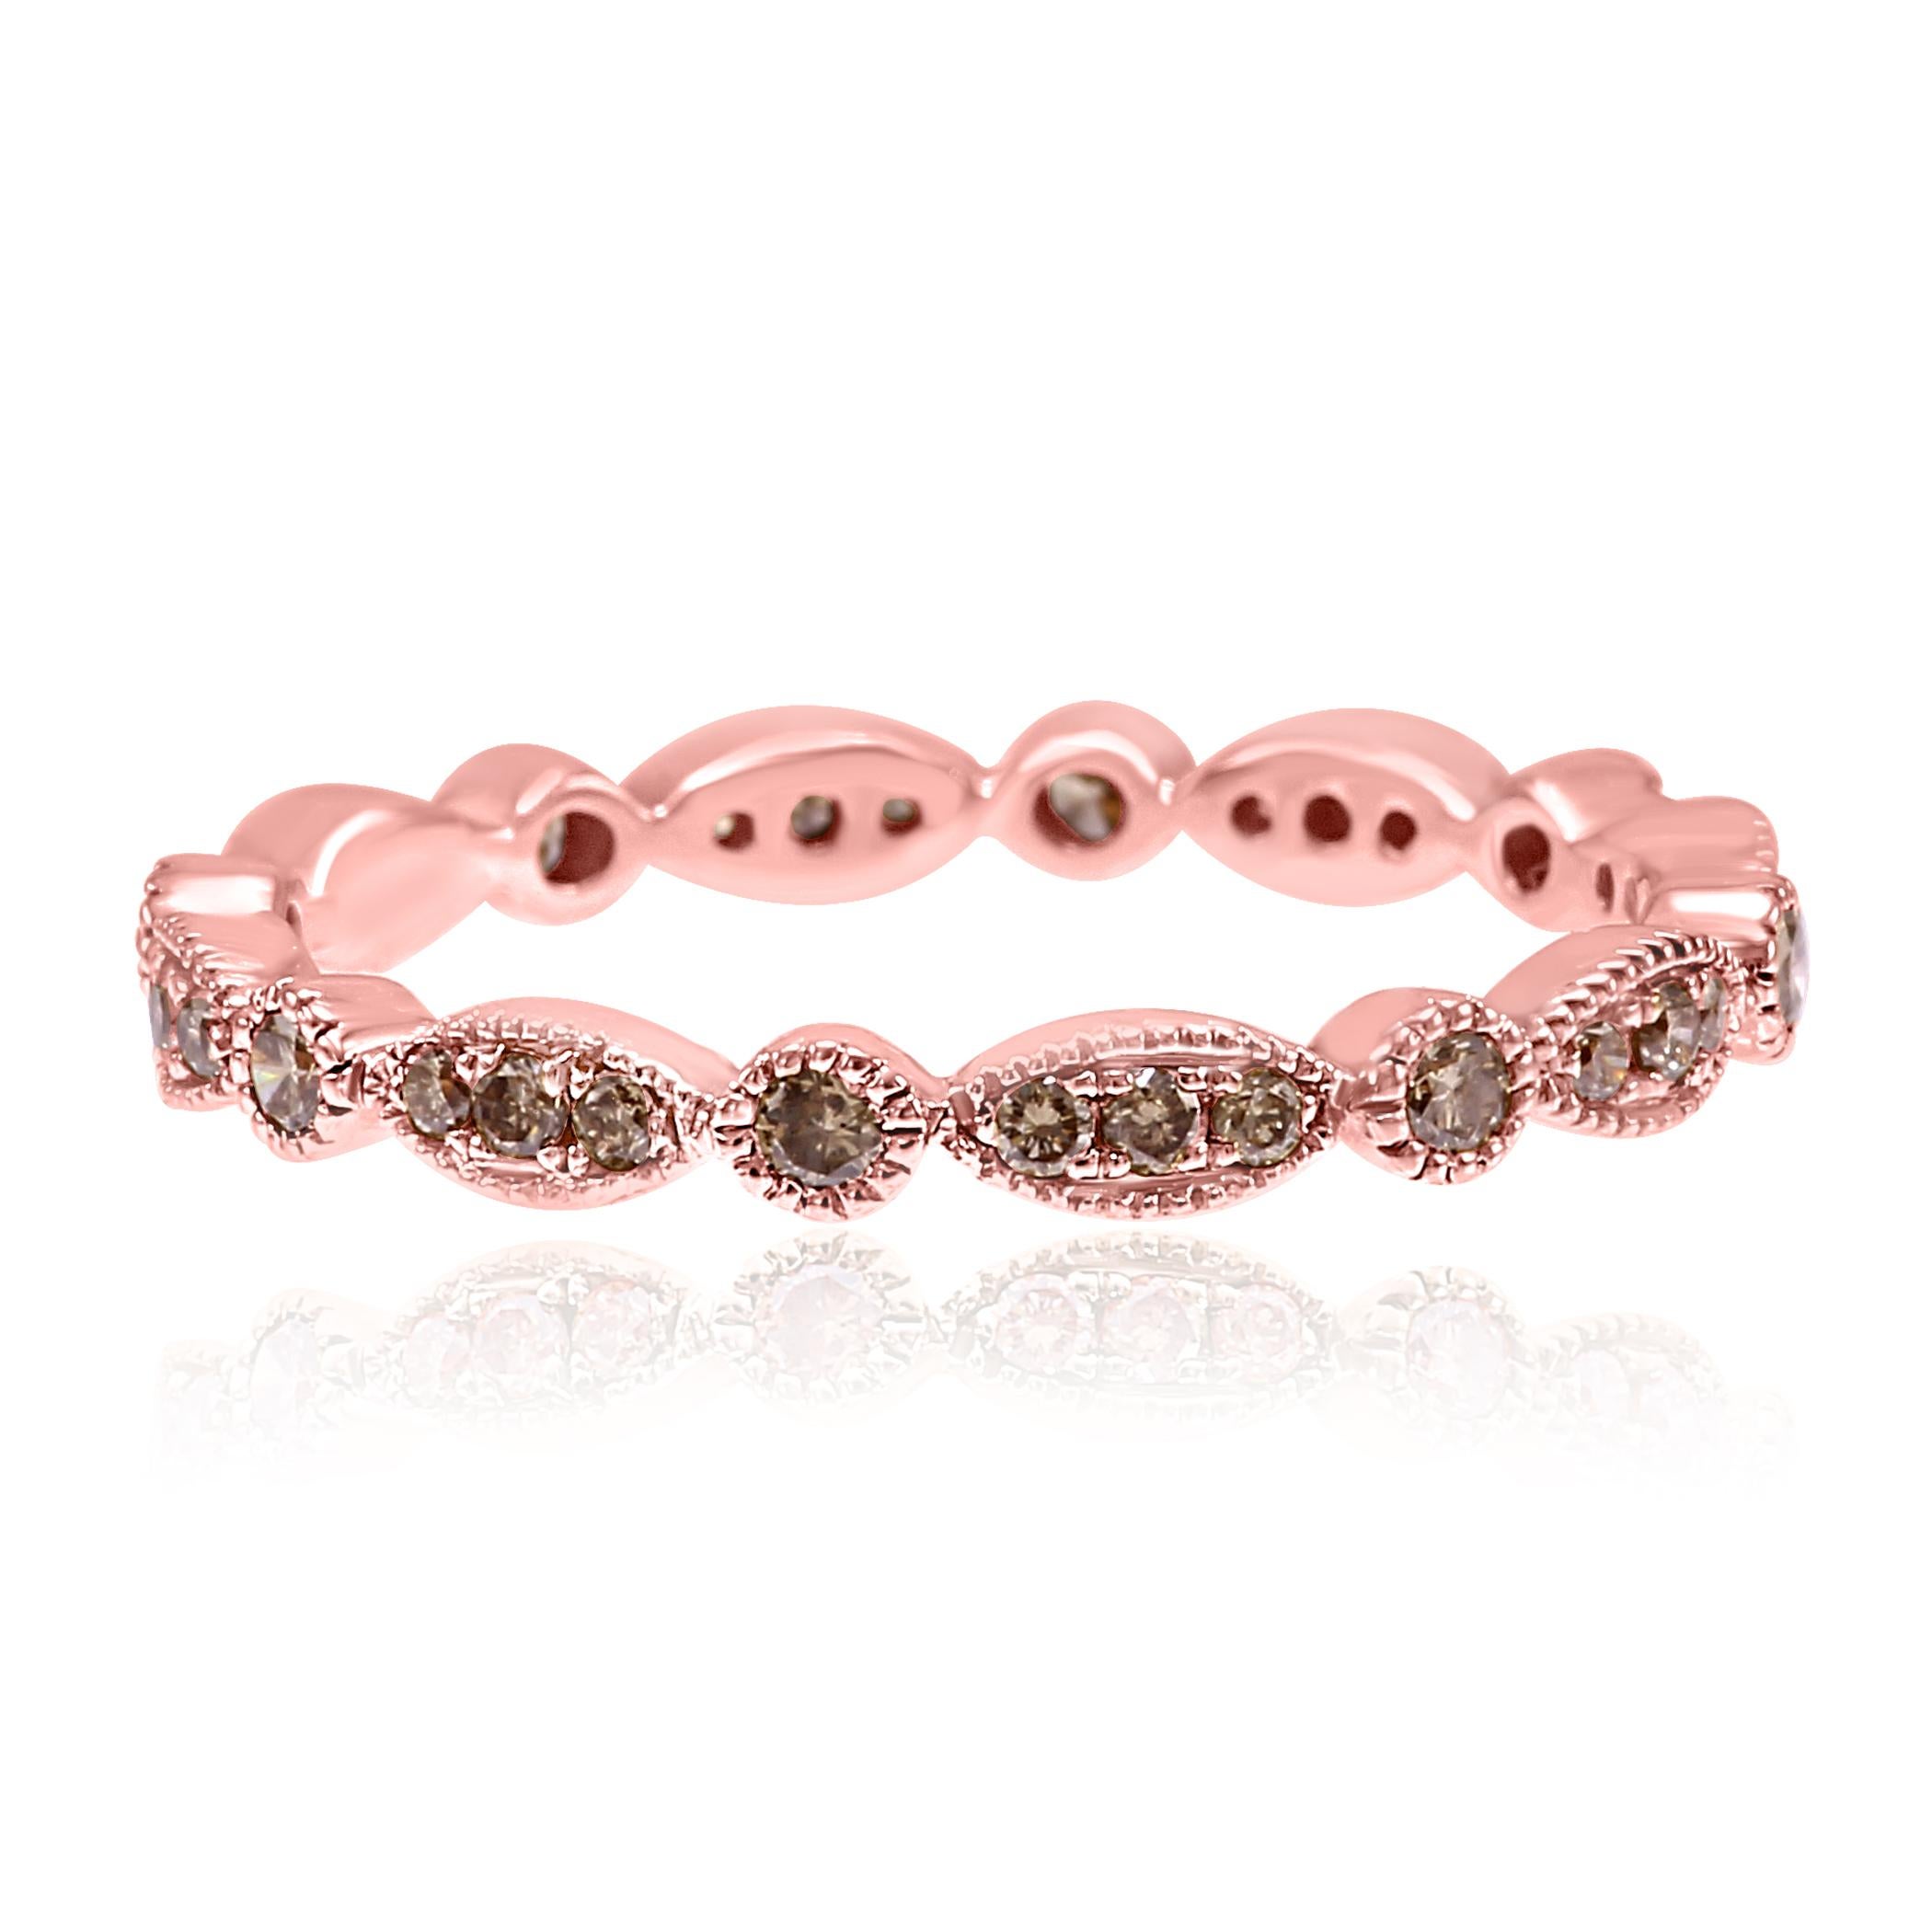 Gorgeous Natural Champagne Diamond Rounds SI clarity 0.45 Carat  Set in 14K Rose Gold Fashion Eternity Band Ring With Filigree work.

Style available in different price ranges, can be customized or custom made as per your requirements. Prices are